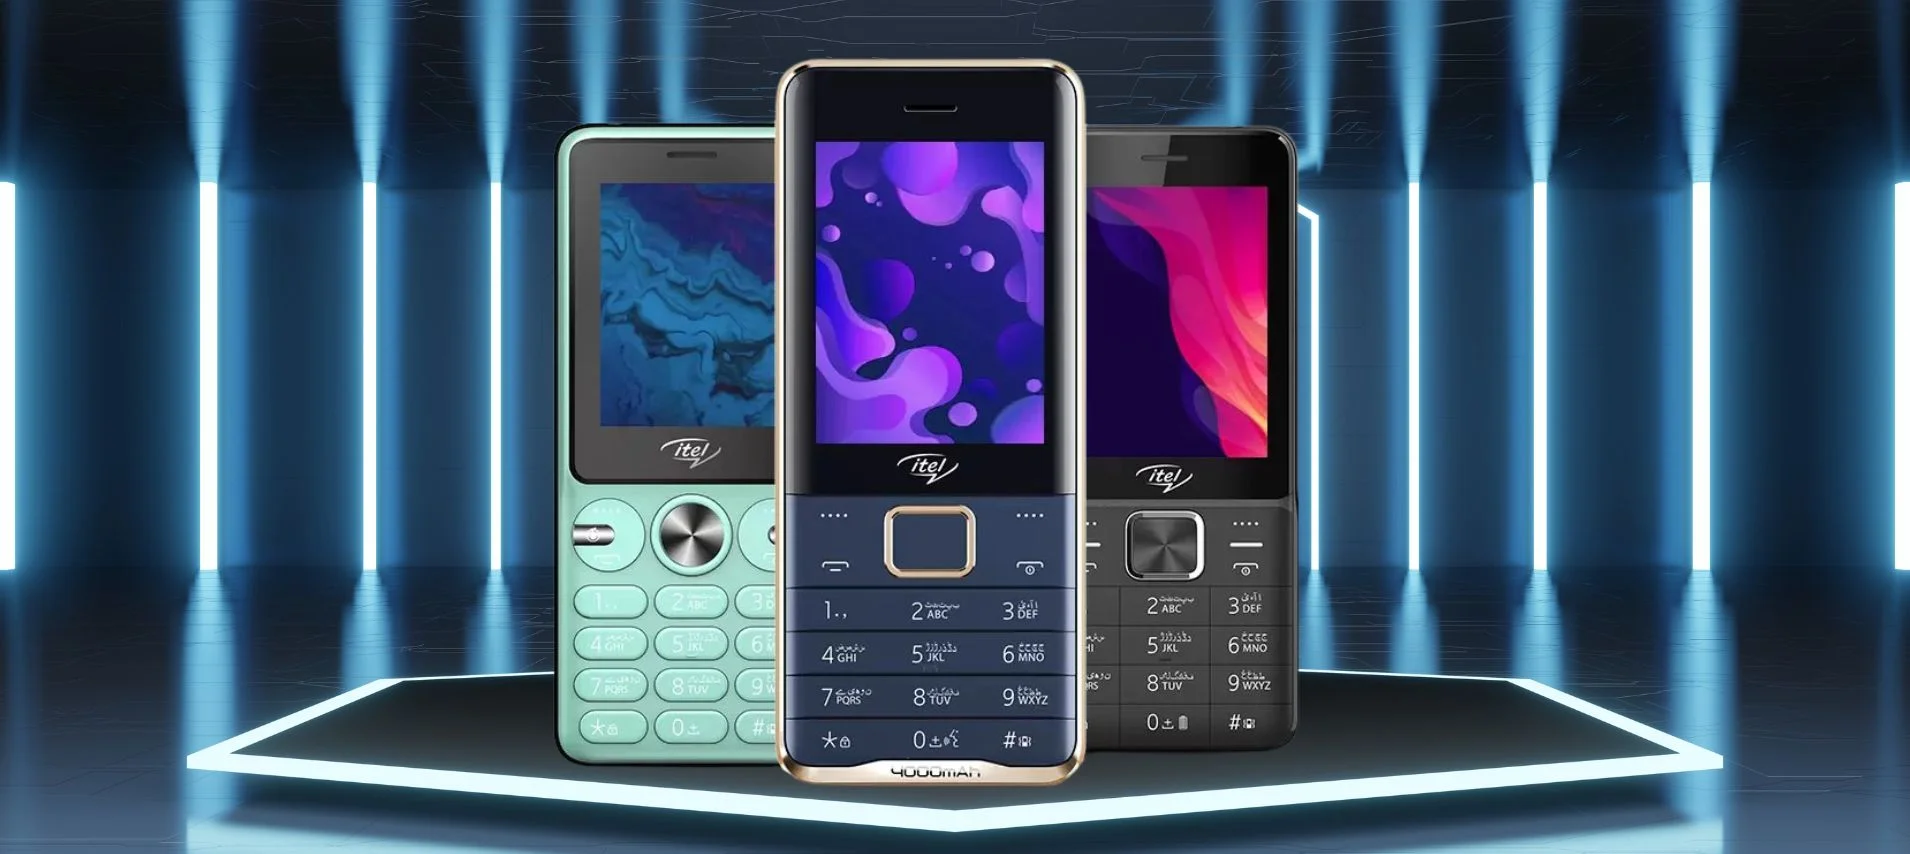 Itel feature phones for sale